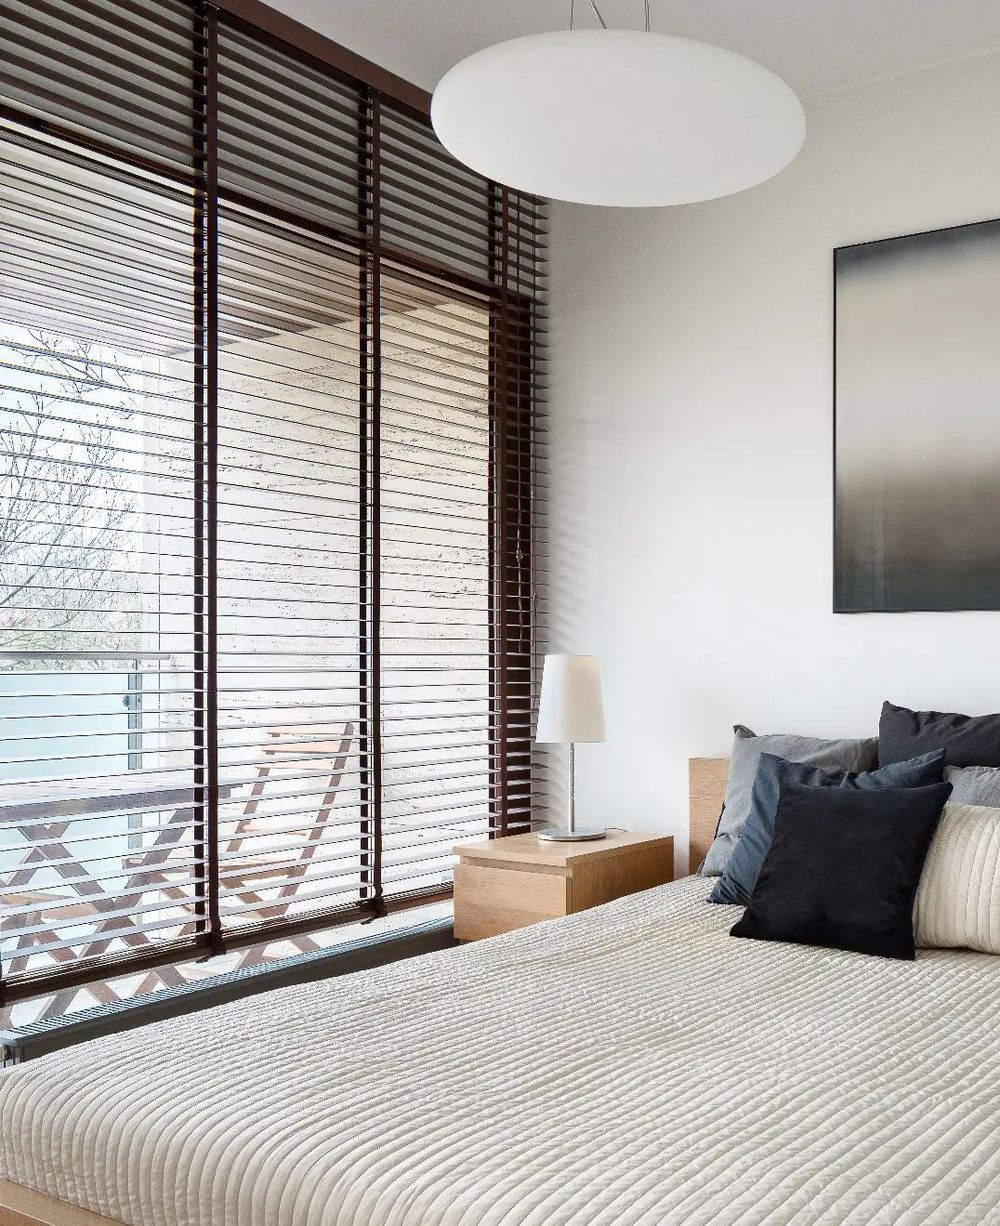 Blinds for window treatments beautifulhomes.india